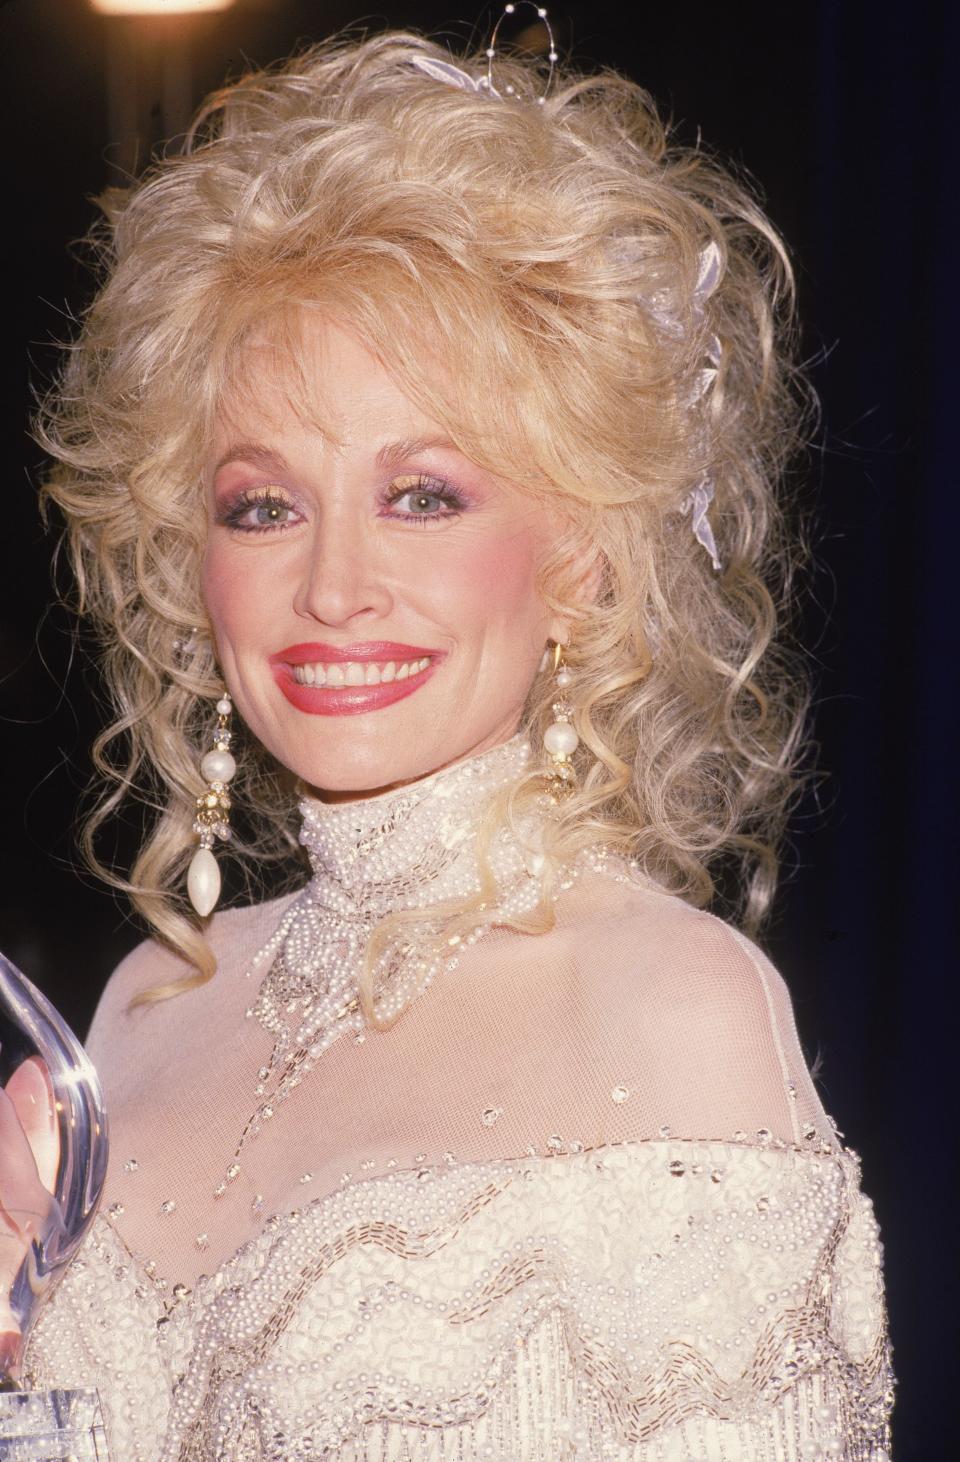 American country music singer and actress Dolly Parton poses with a People's Choice Award, March 13, 1988. She wears a white sequinned dress with transparent shoulders and long earrings. (Photo by Fotos International/Robert Scott/Getty Images)